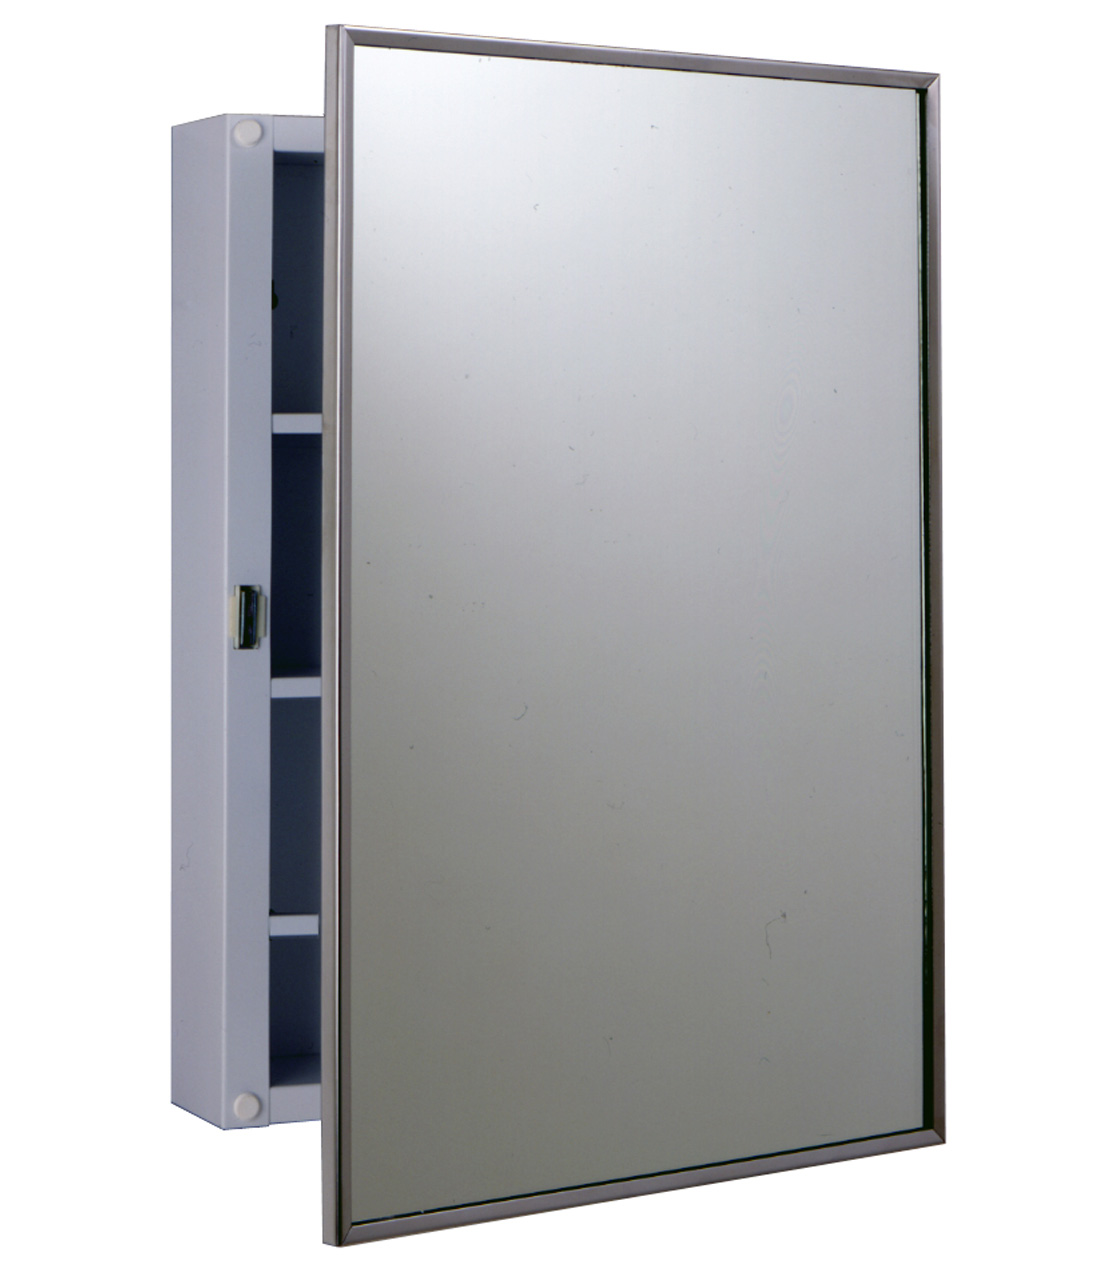 Surface-Mounted Stainless Steel Medicine Cabinet - (Model #: mc-2) Image